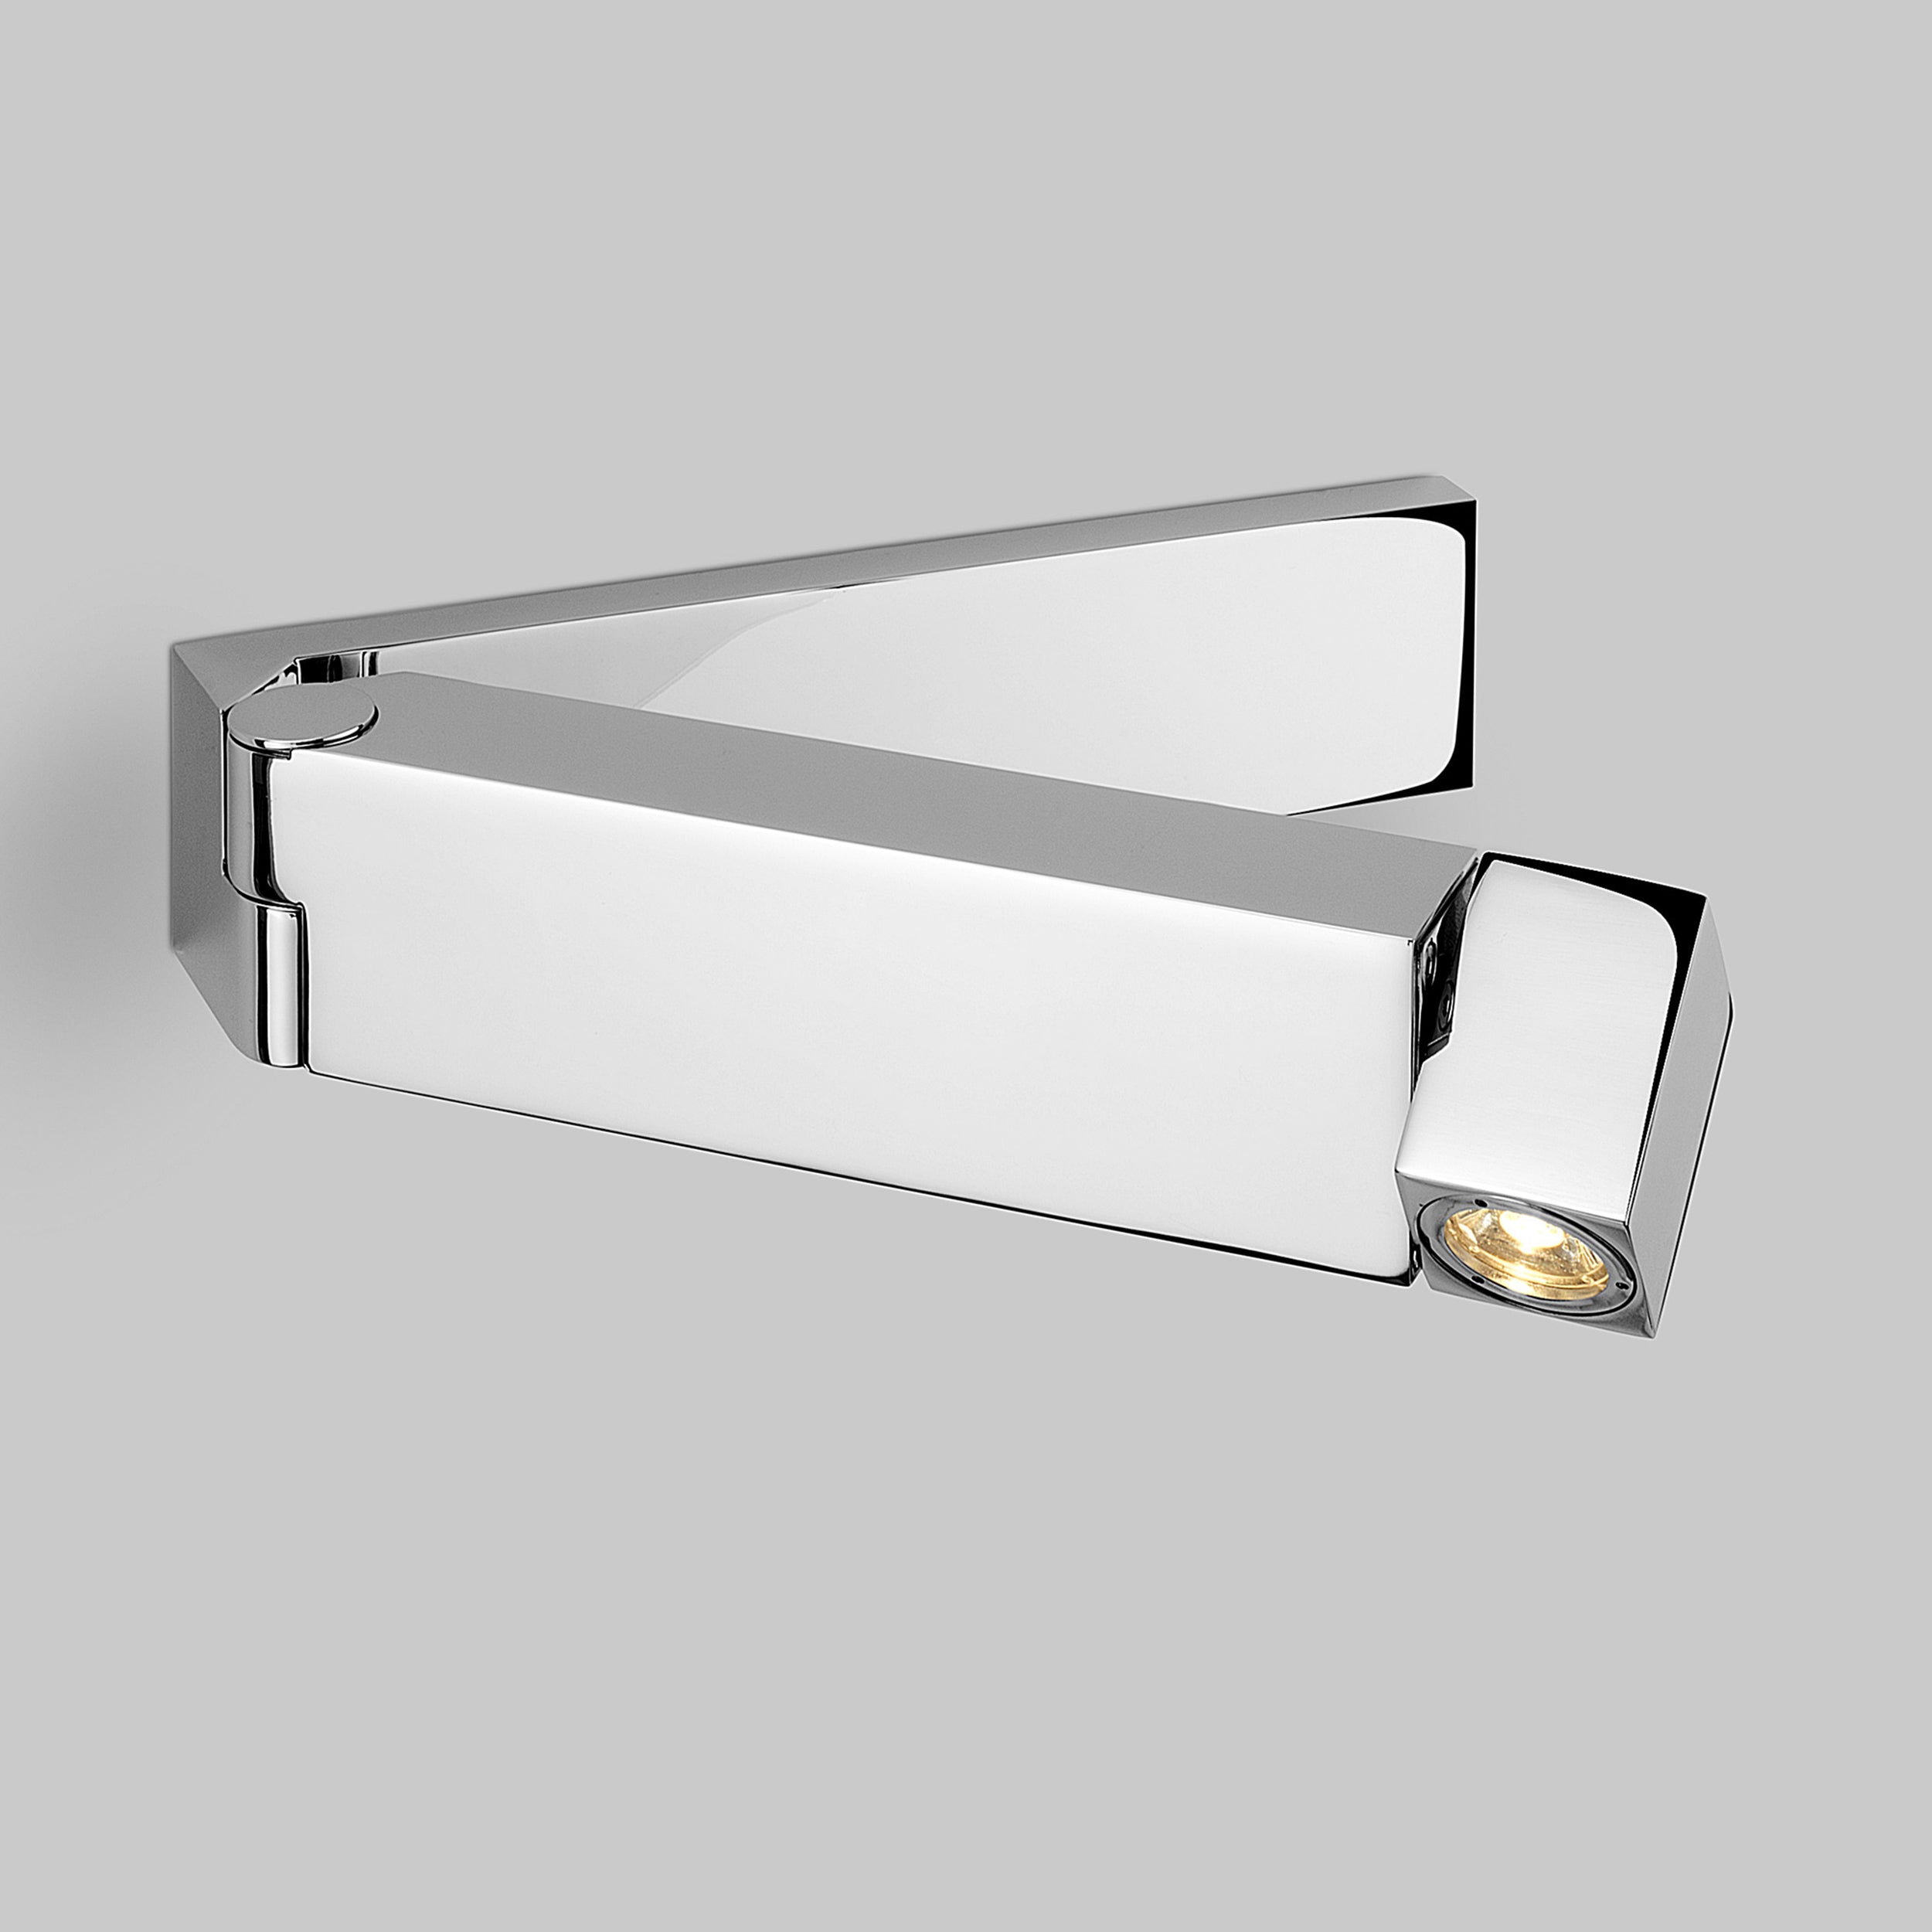 Astro Lighting Tosca Wall Light Fixtures Astro Lighting 1.69x7.87x1.77 Polished Chrome Yes (Integral), High Power LED